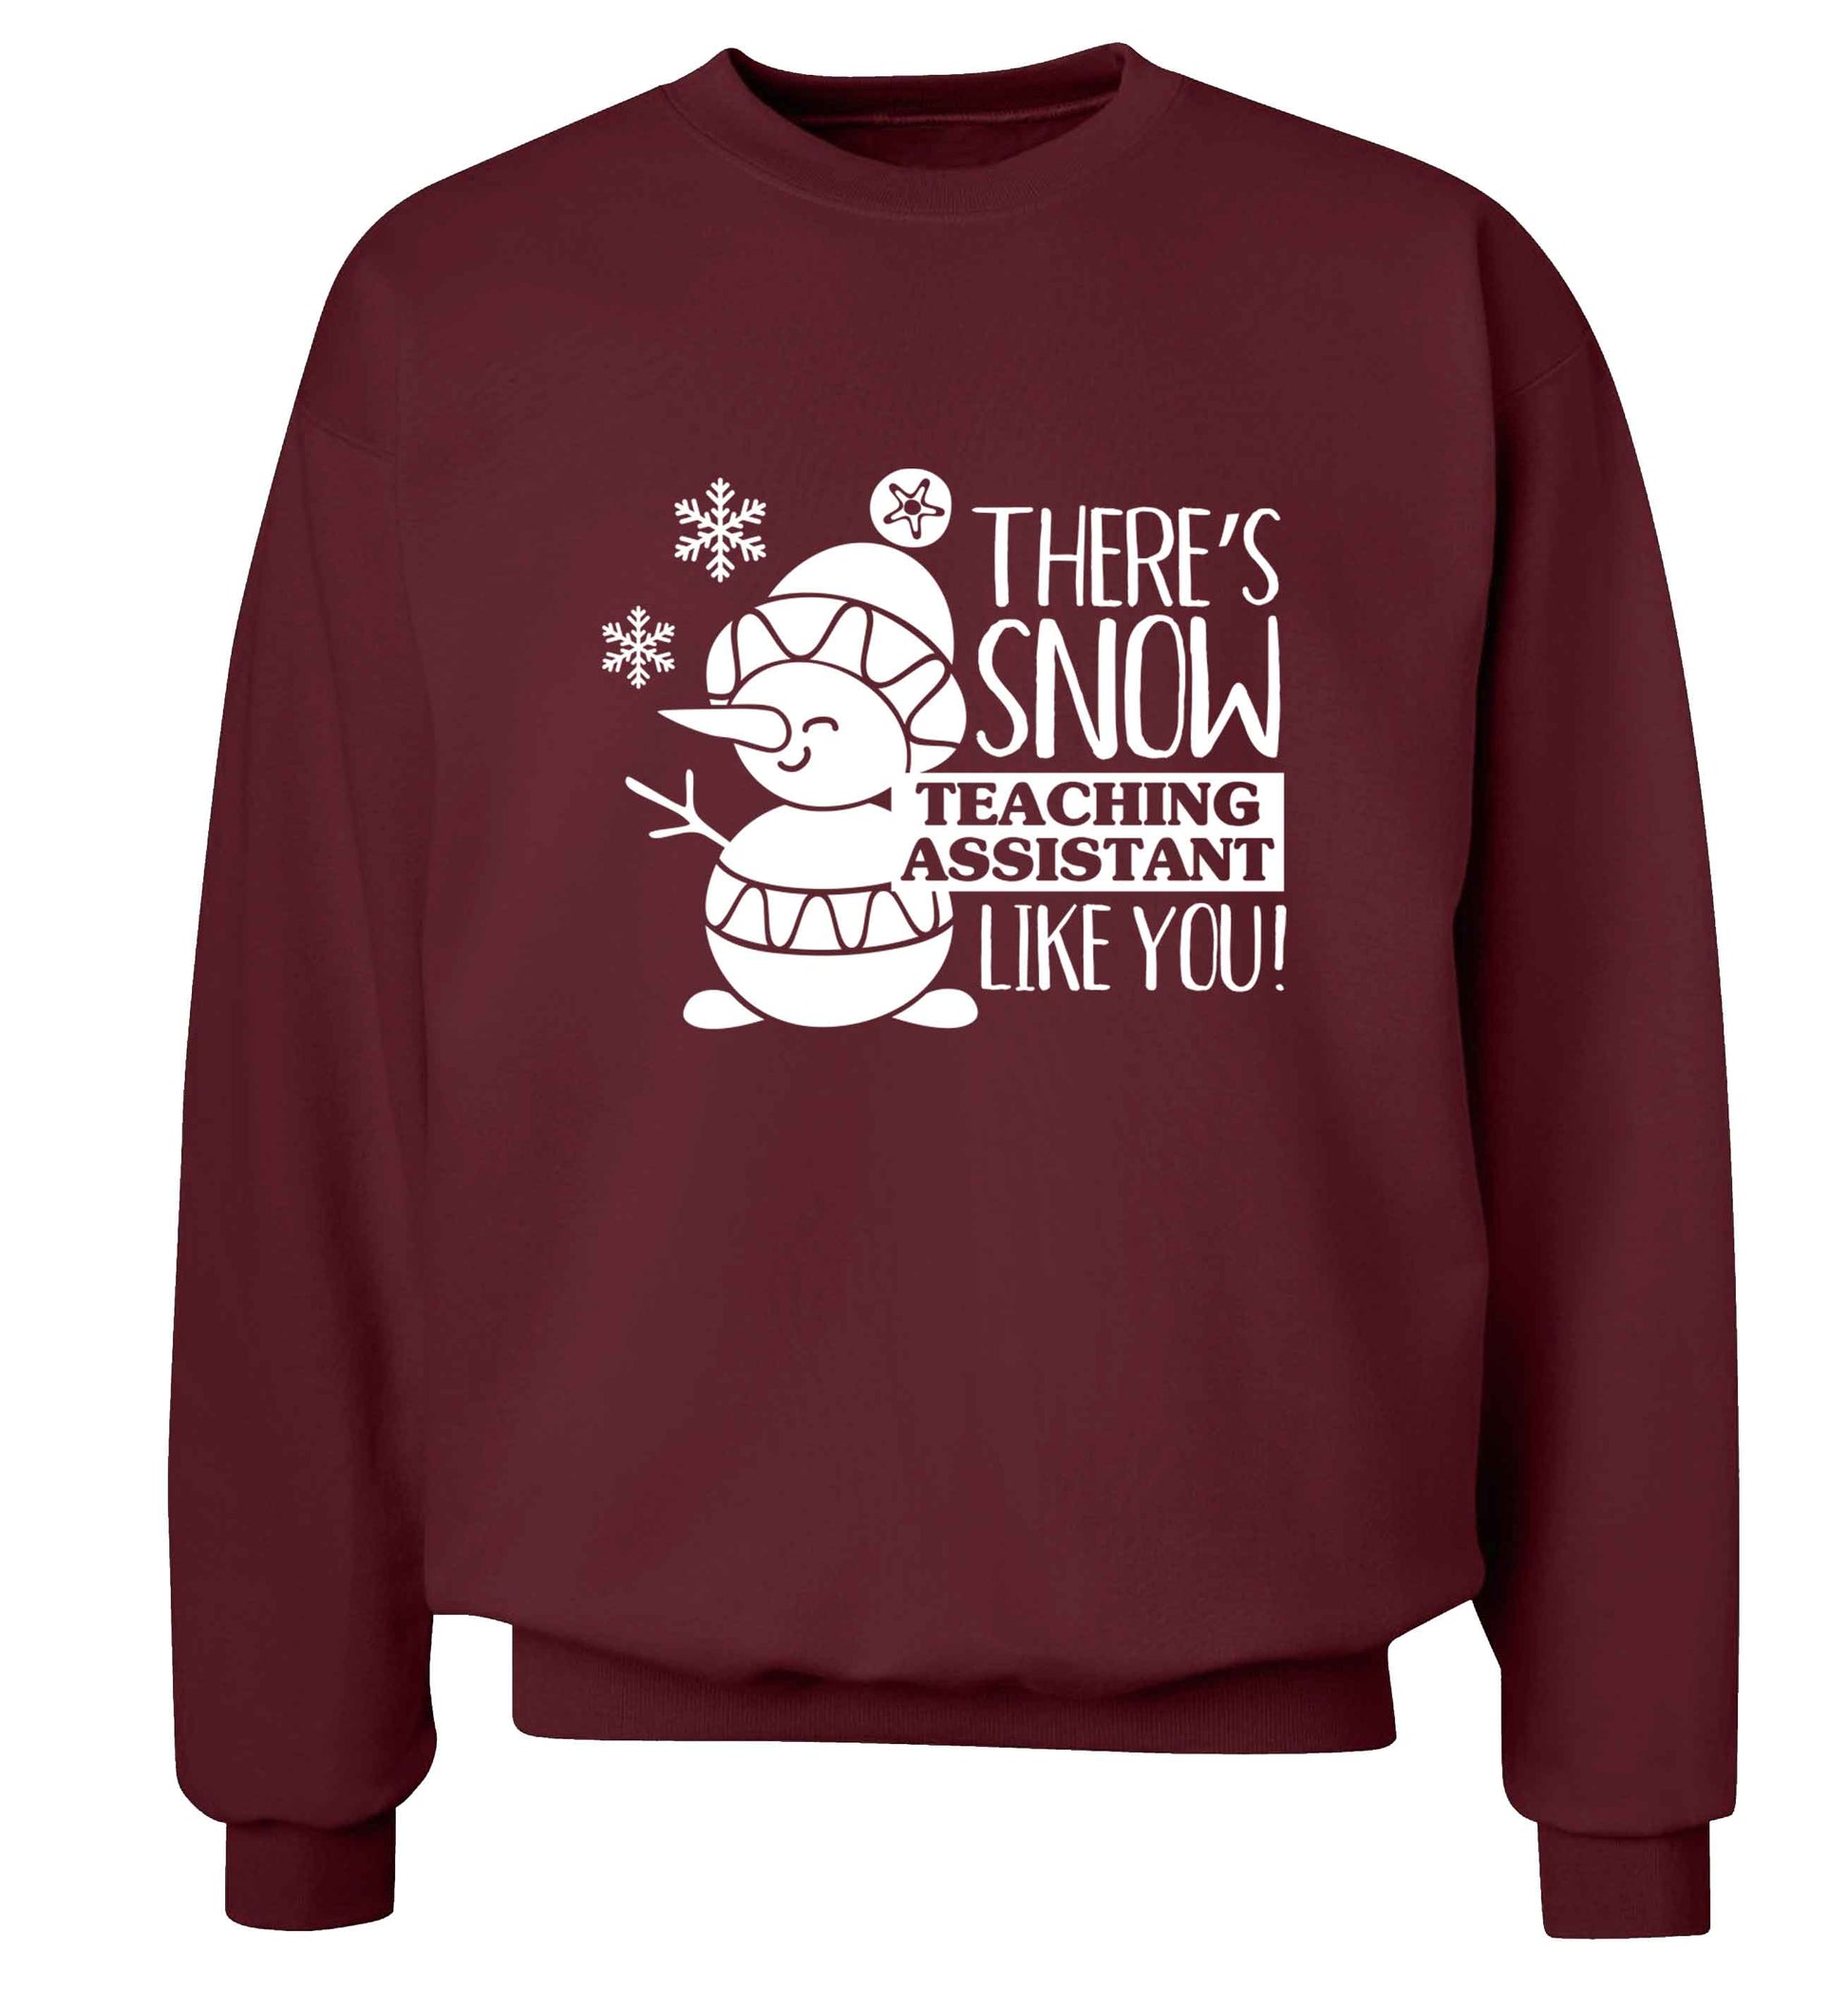 There's snow teaching assistant like you adult's unisex maroon sweater 2XL